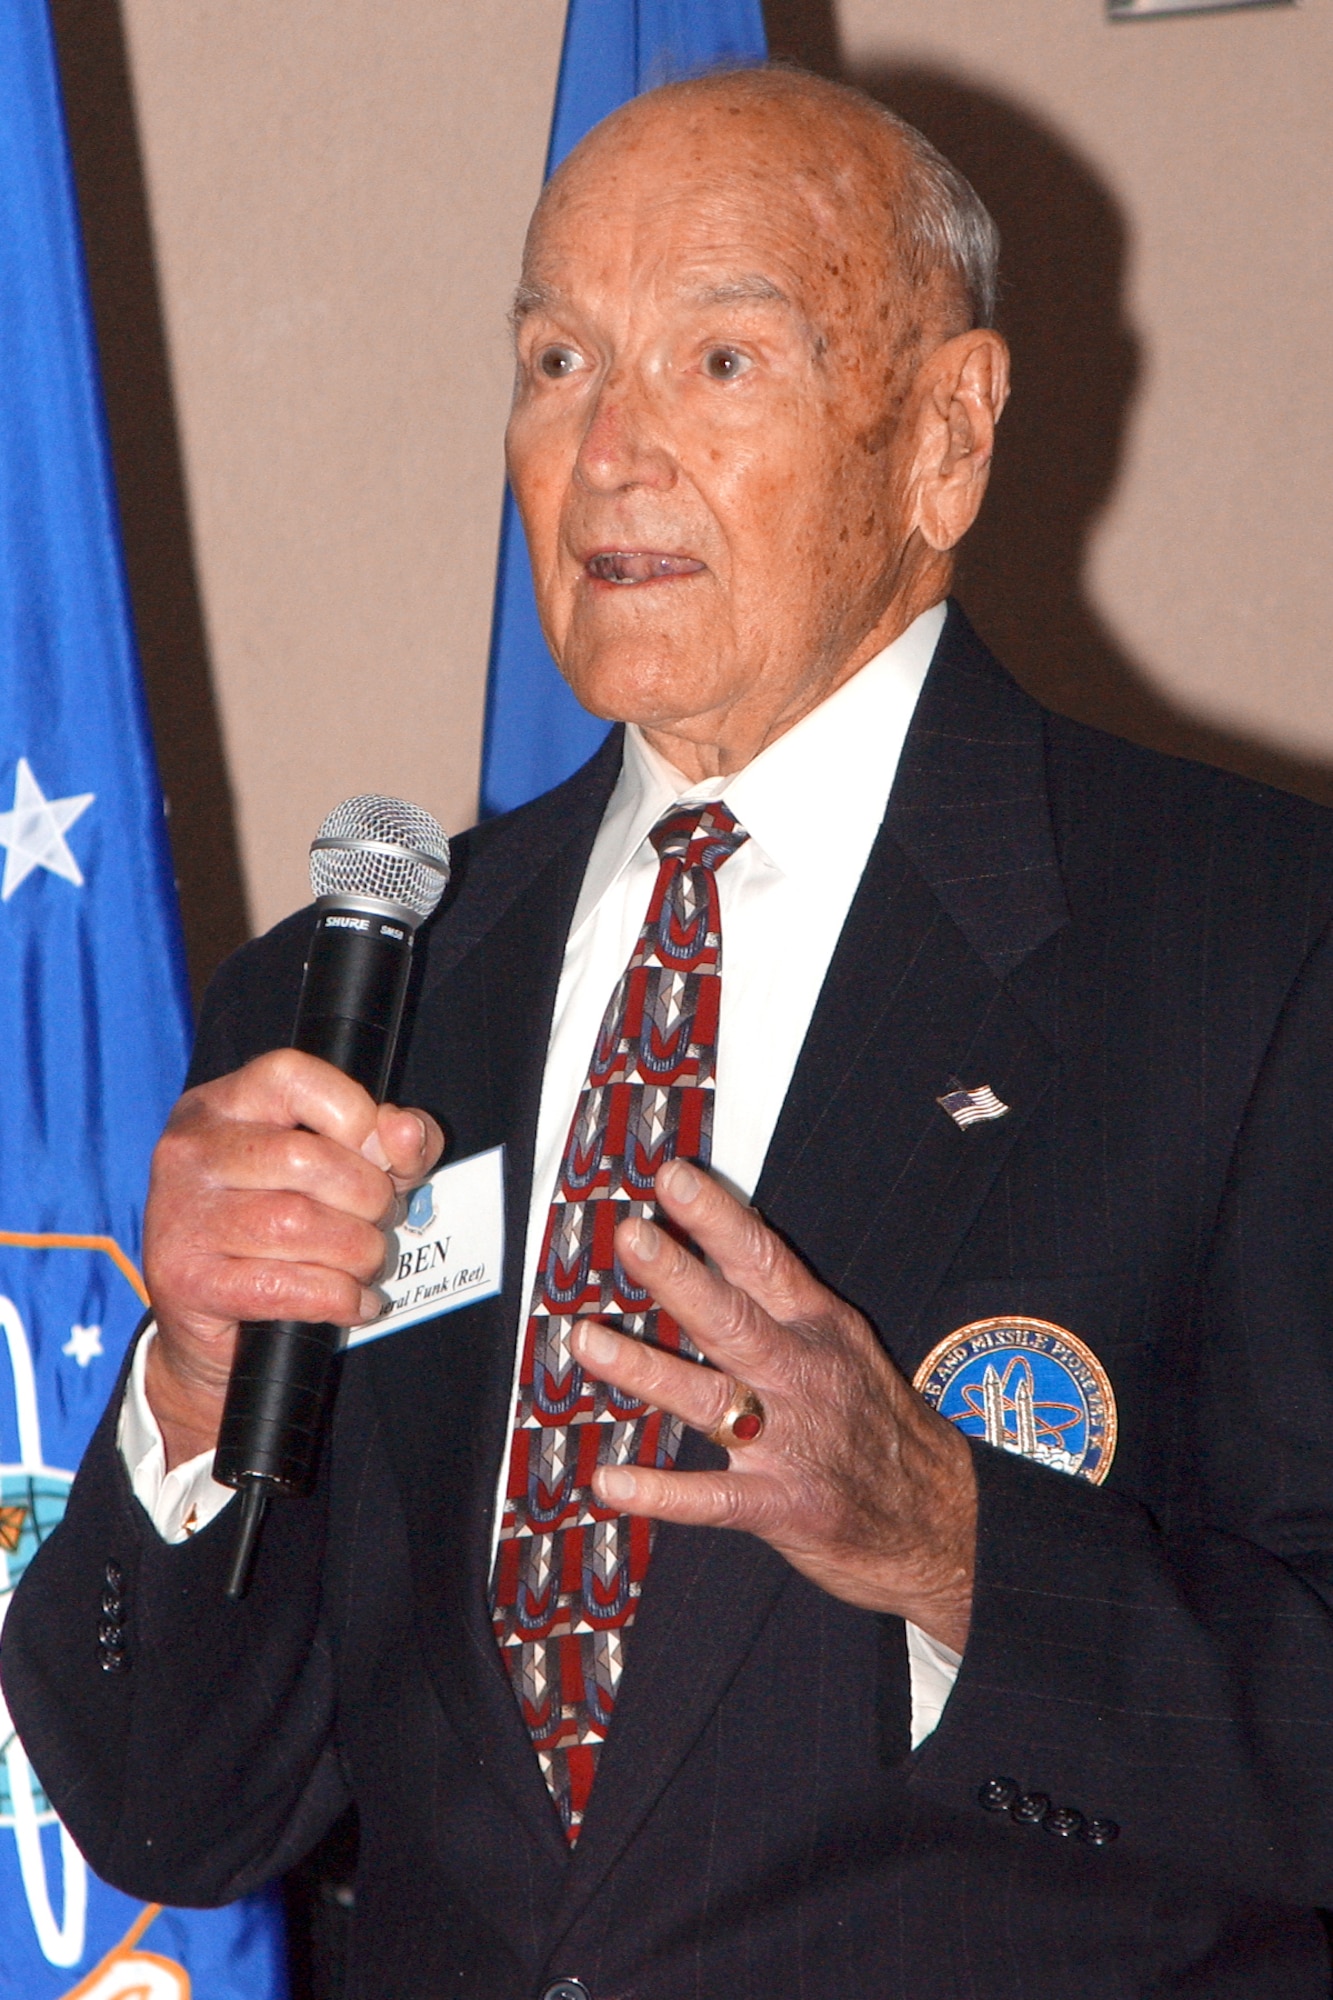 Retired Maj. Gen. Ben I. Funk takes his place in the Air Force Space and Missile Pioneers Hall of Fame in a ceremony Aug. 24 at Headquarters Air Force Space Command at Peterson Air Force Base, Colo. (U.S. Air Force photo by Duncan Wood)         